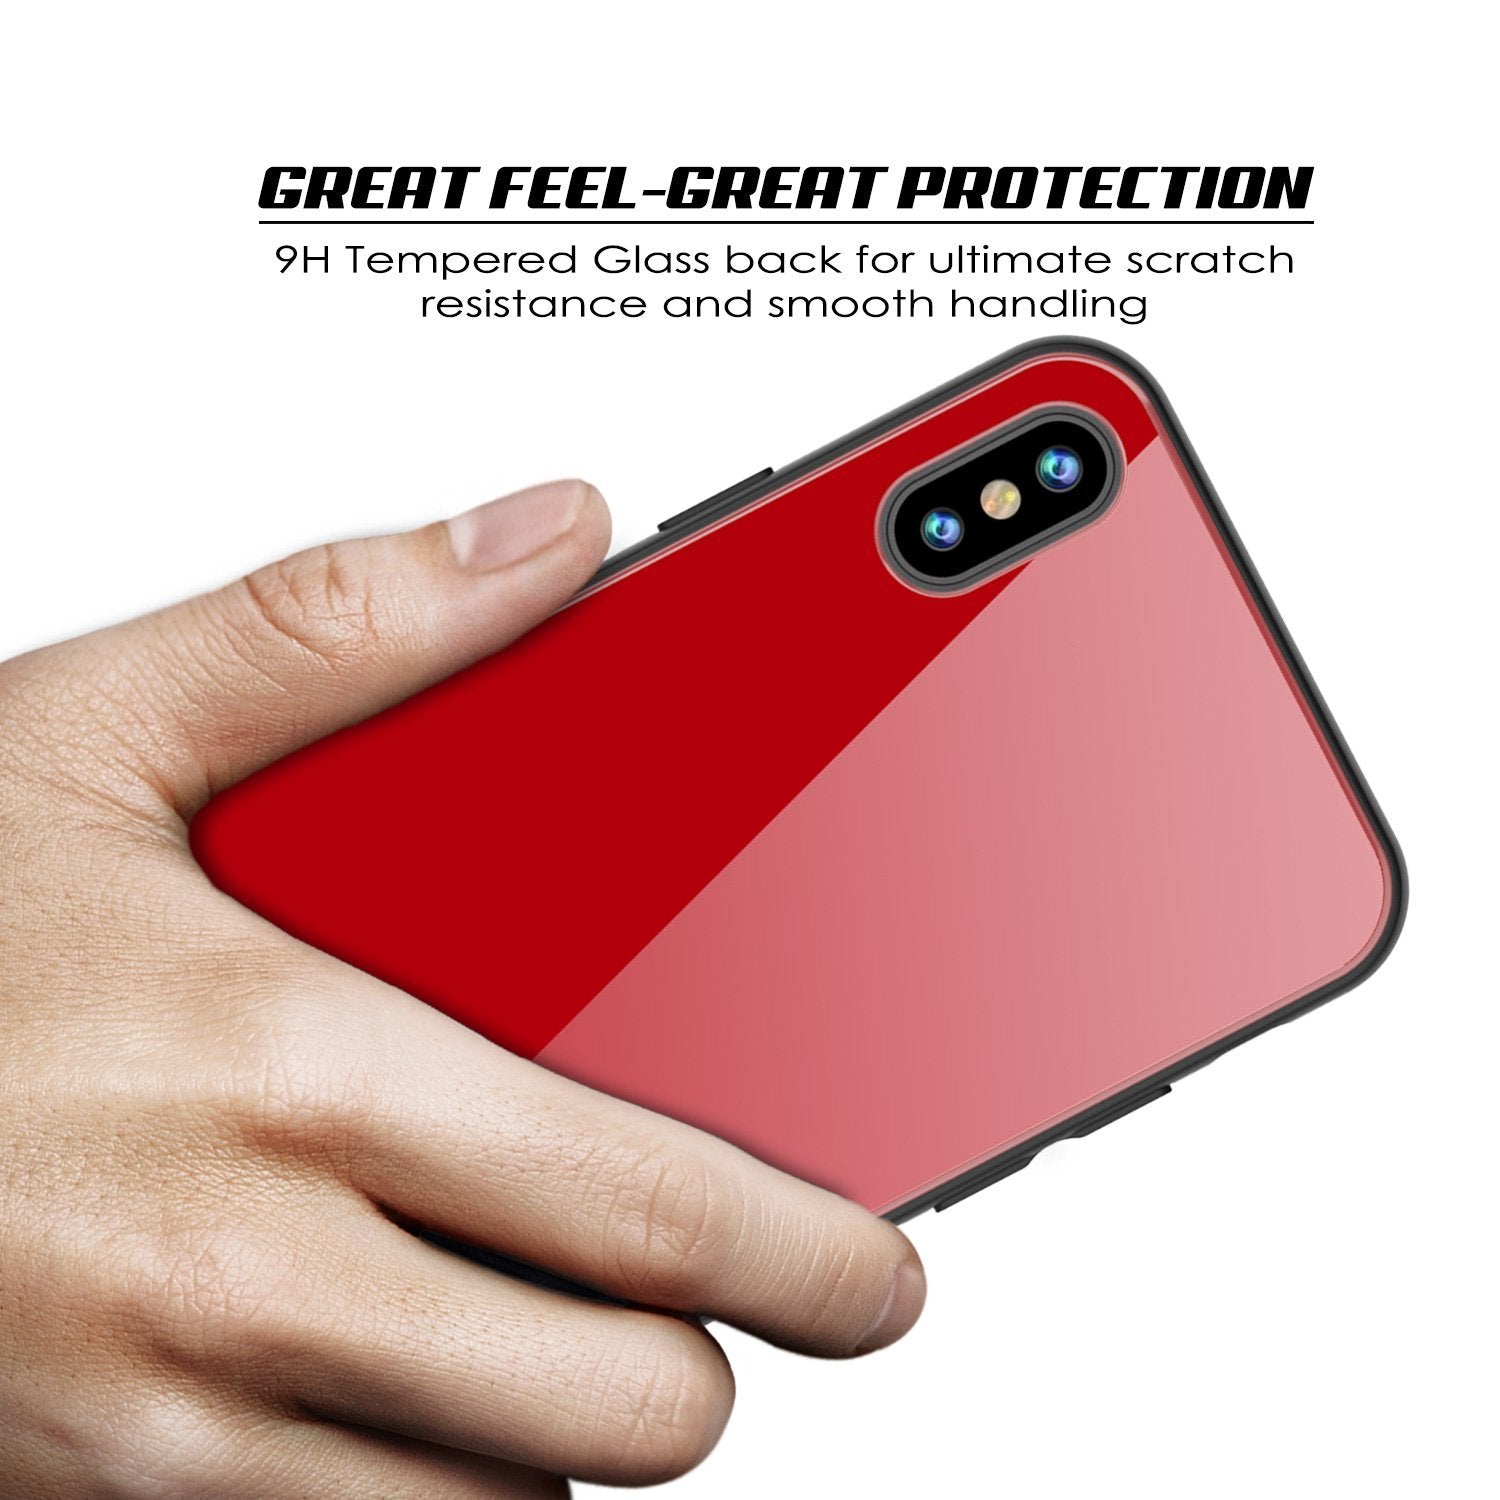 iPhone 8 Case, Punkcase GlassShield Ultra Thin Protective 9H Full Body Tempered Glass Cover W/ Drop Protection & Non Slip Grip for Apple iPhone 7 / Apple iPhone 8 (Red)